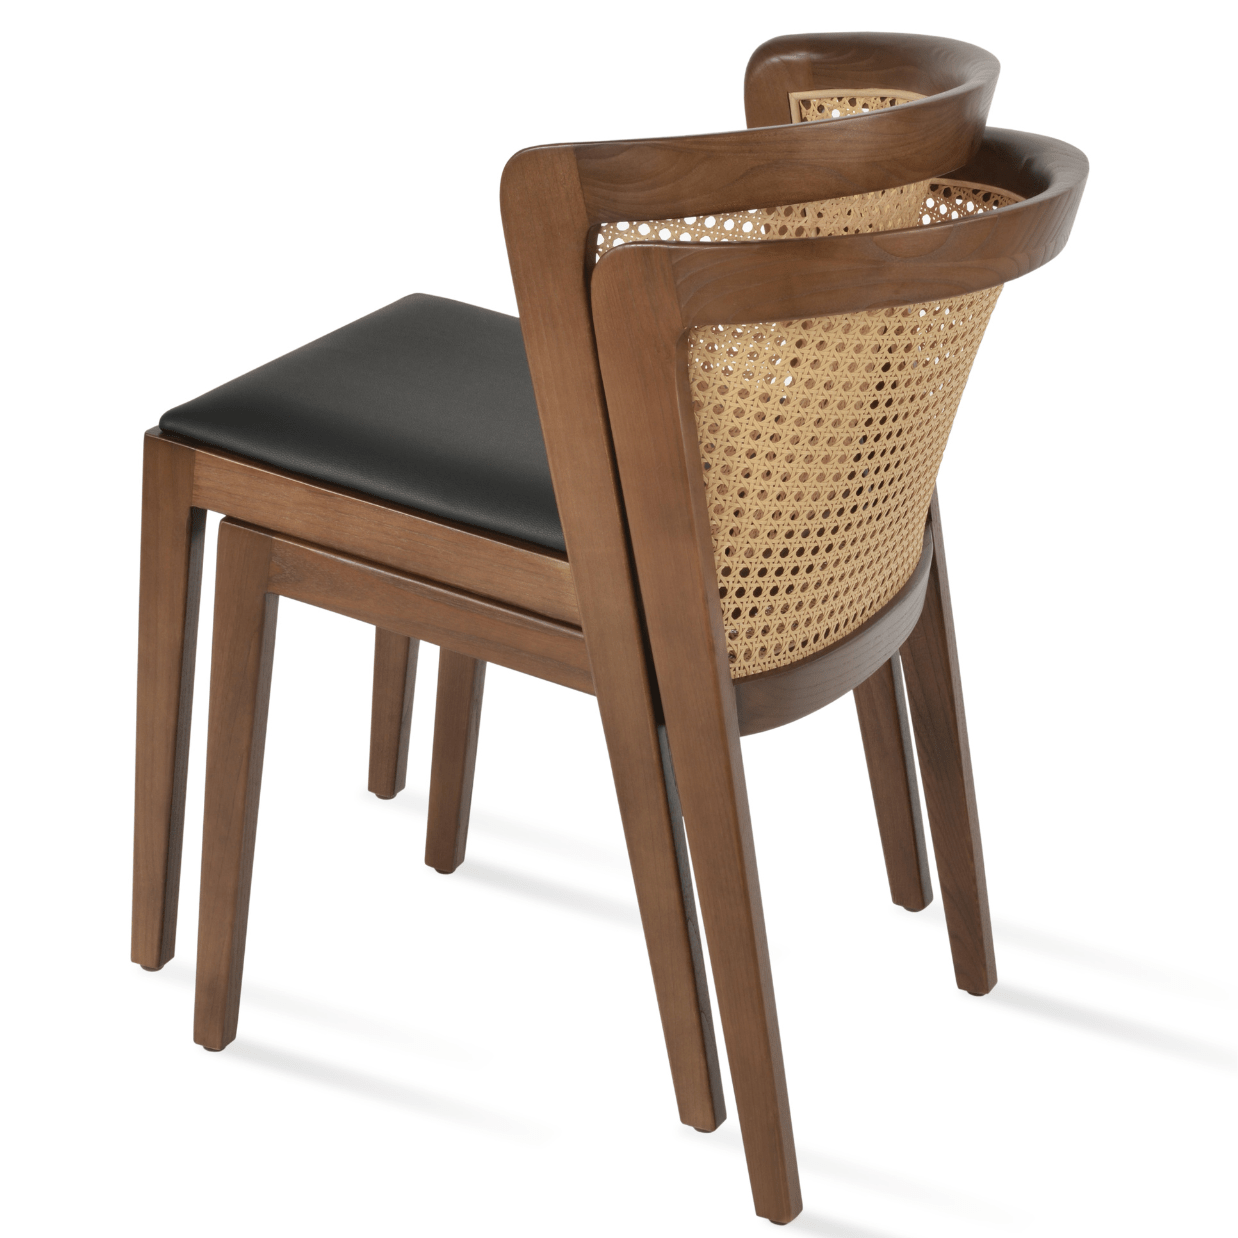 Curvy Caned Chairs Hatay - Your Bar Stools Canada